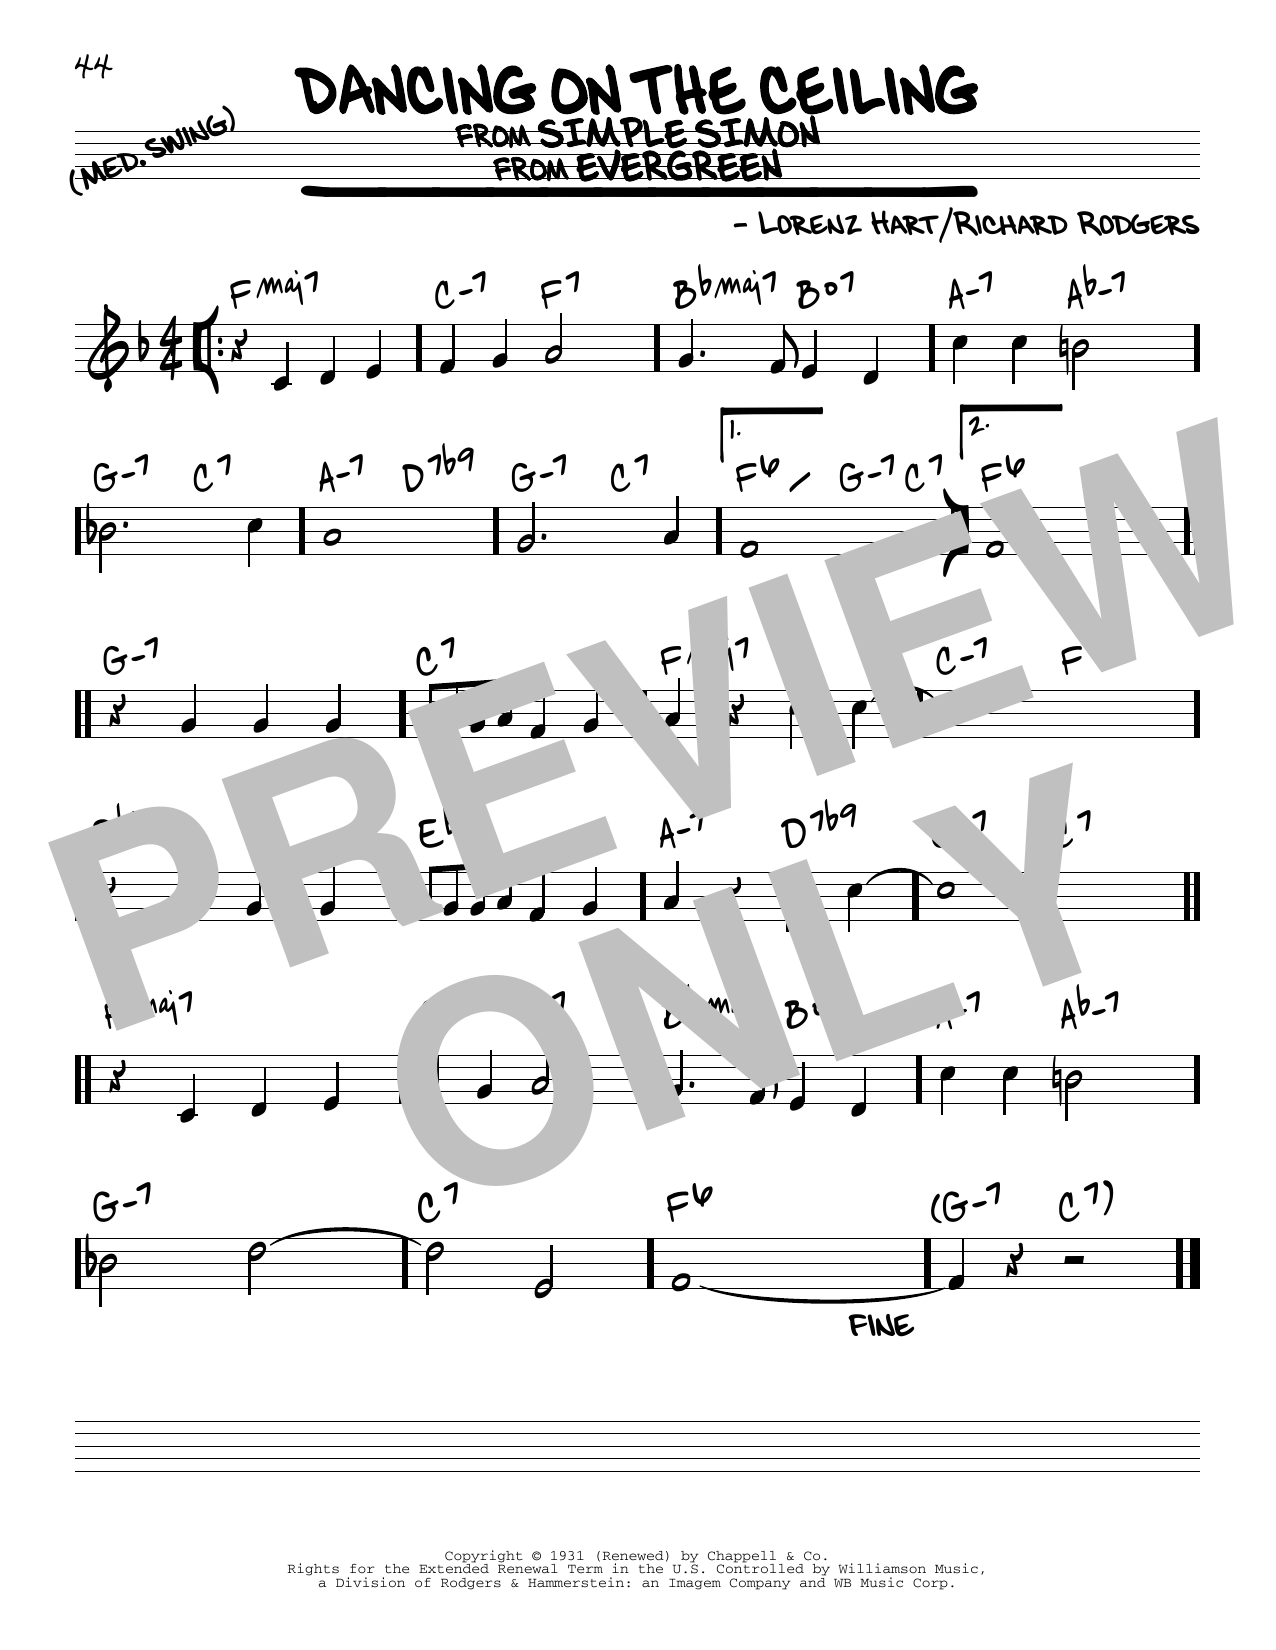 Download Rodgers & Hart Dancing On The Ceiling Sheet Music